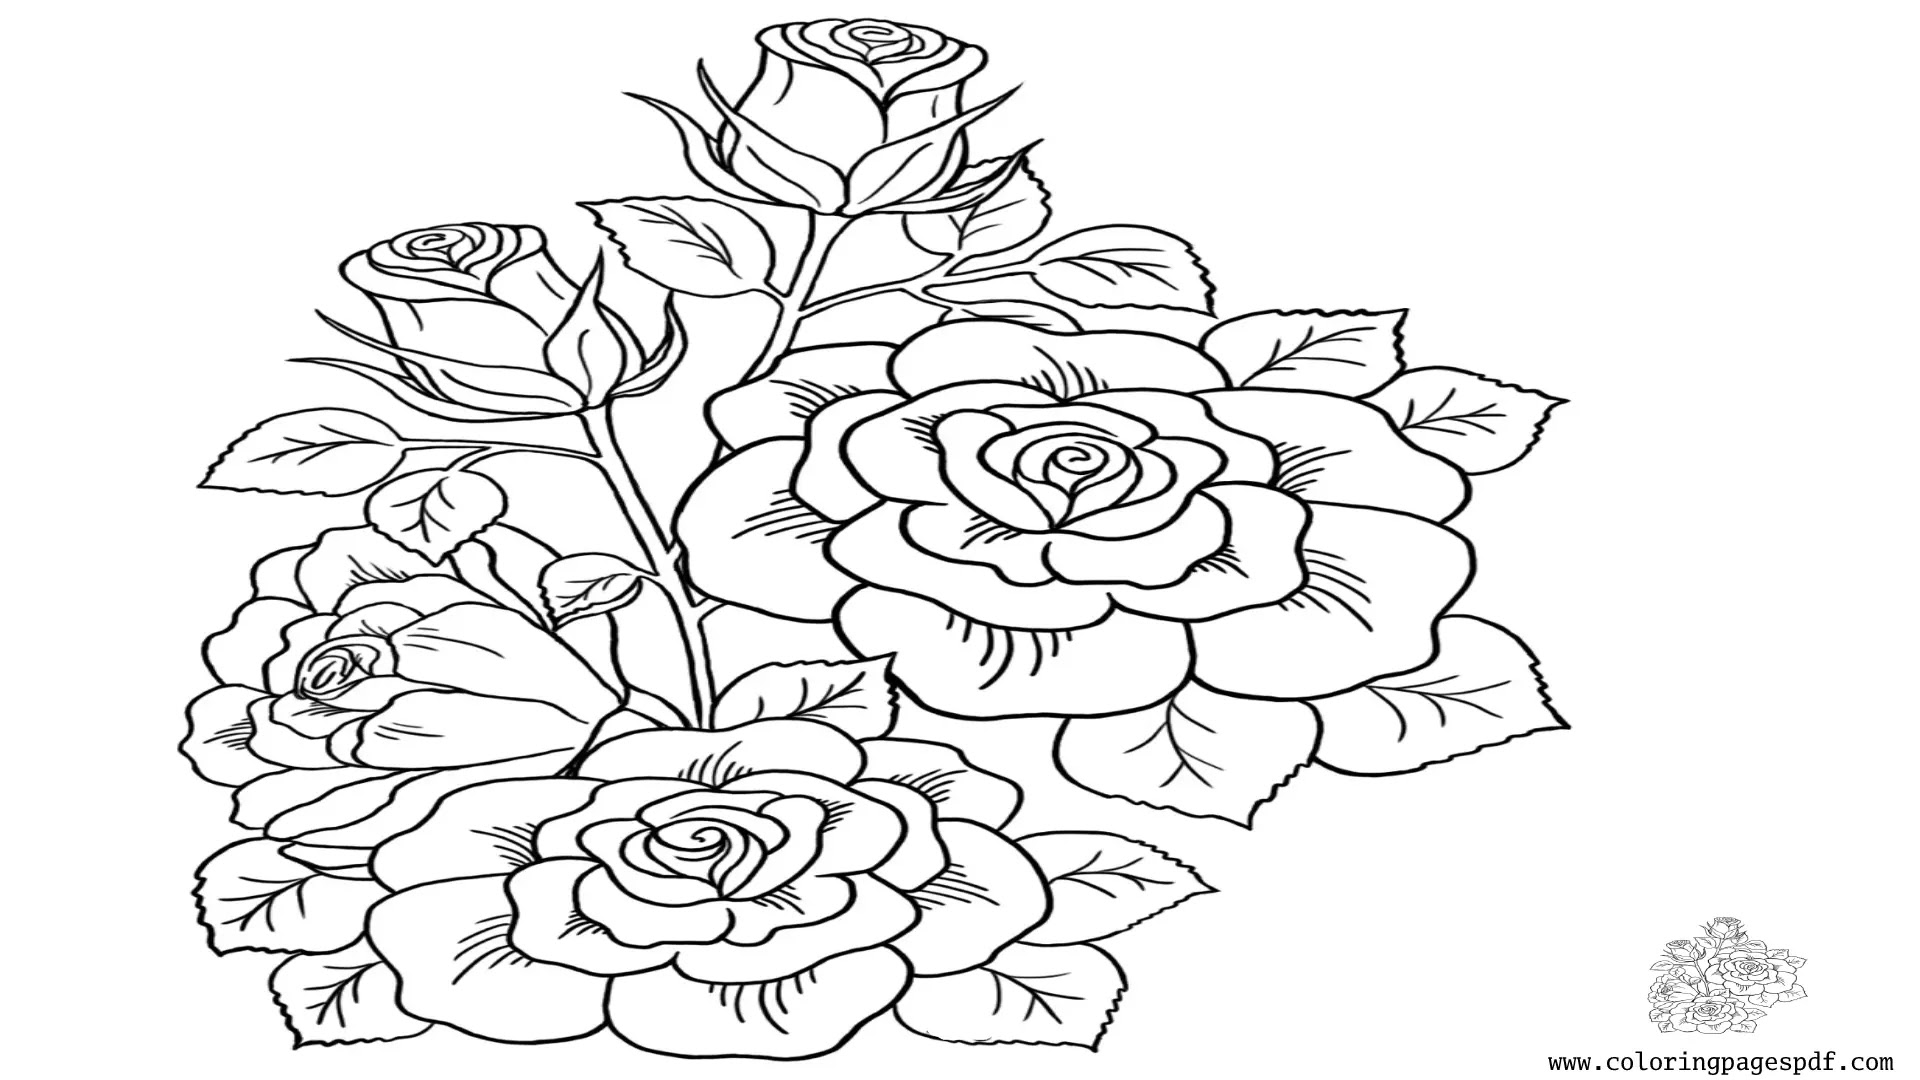 Coloring Page Of Beautiful And Multiple Roses